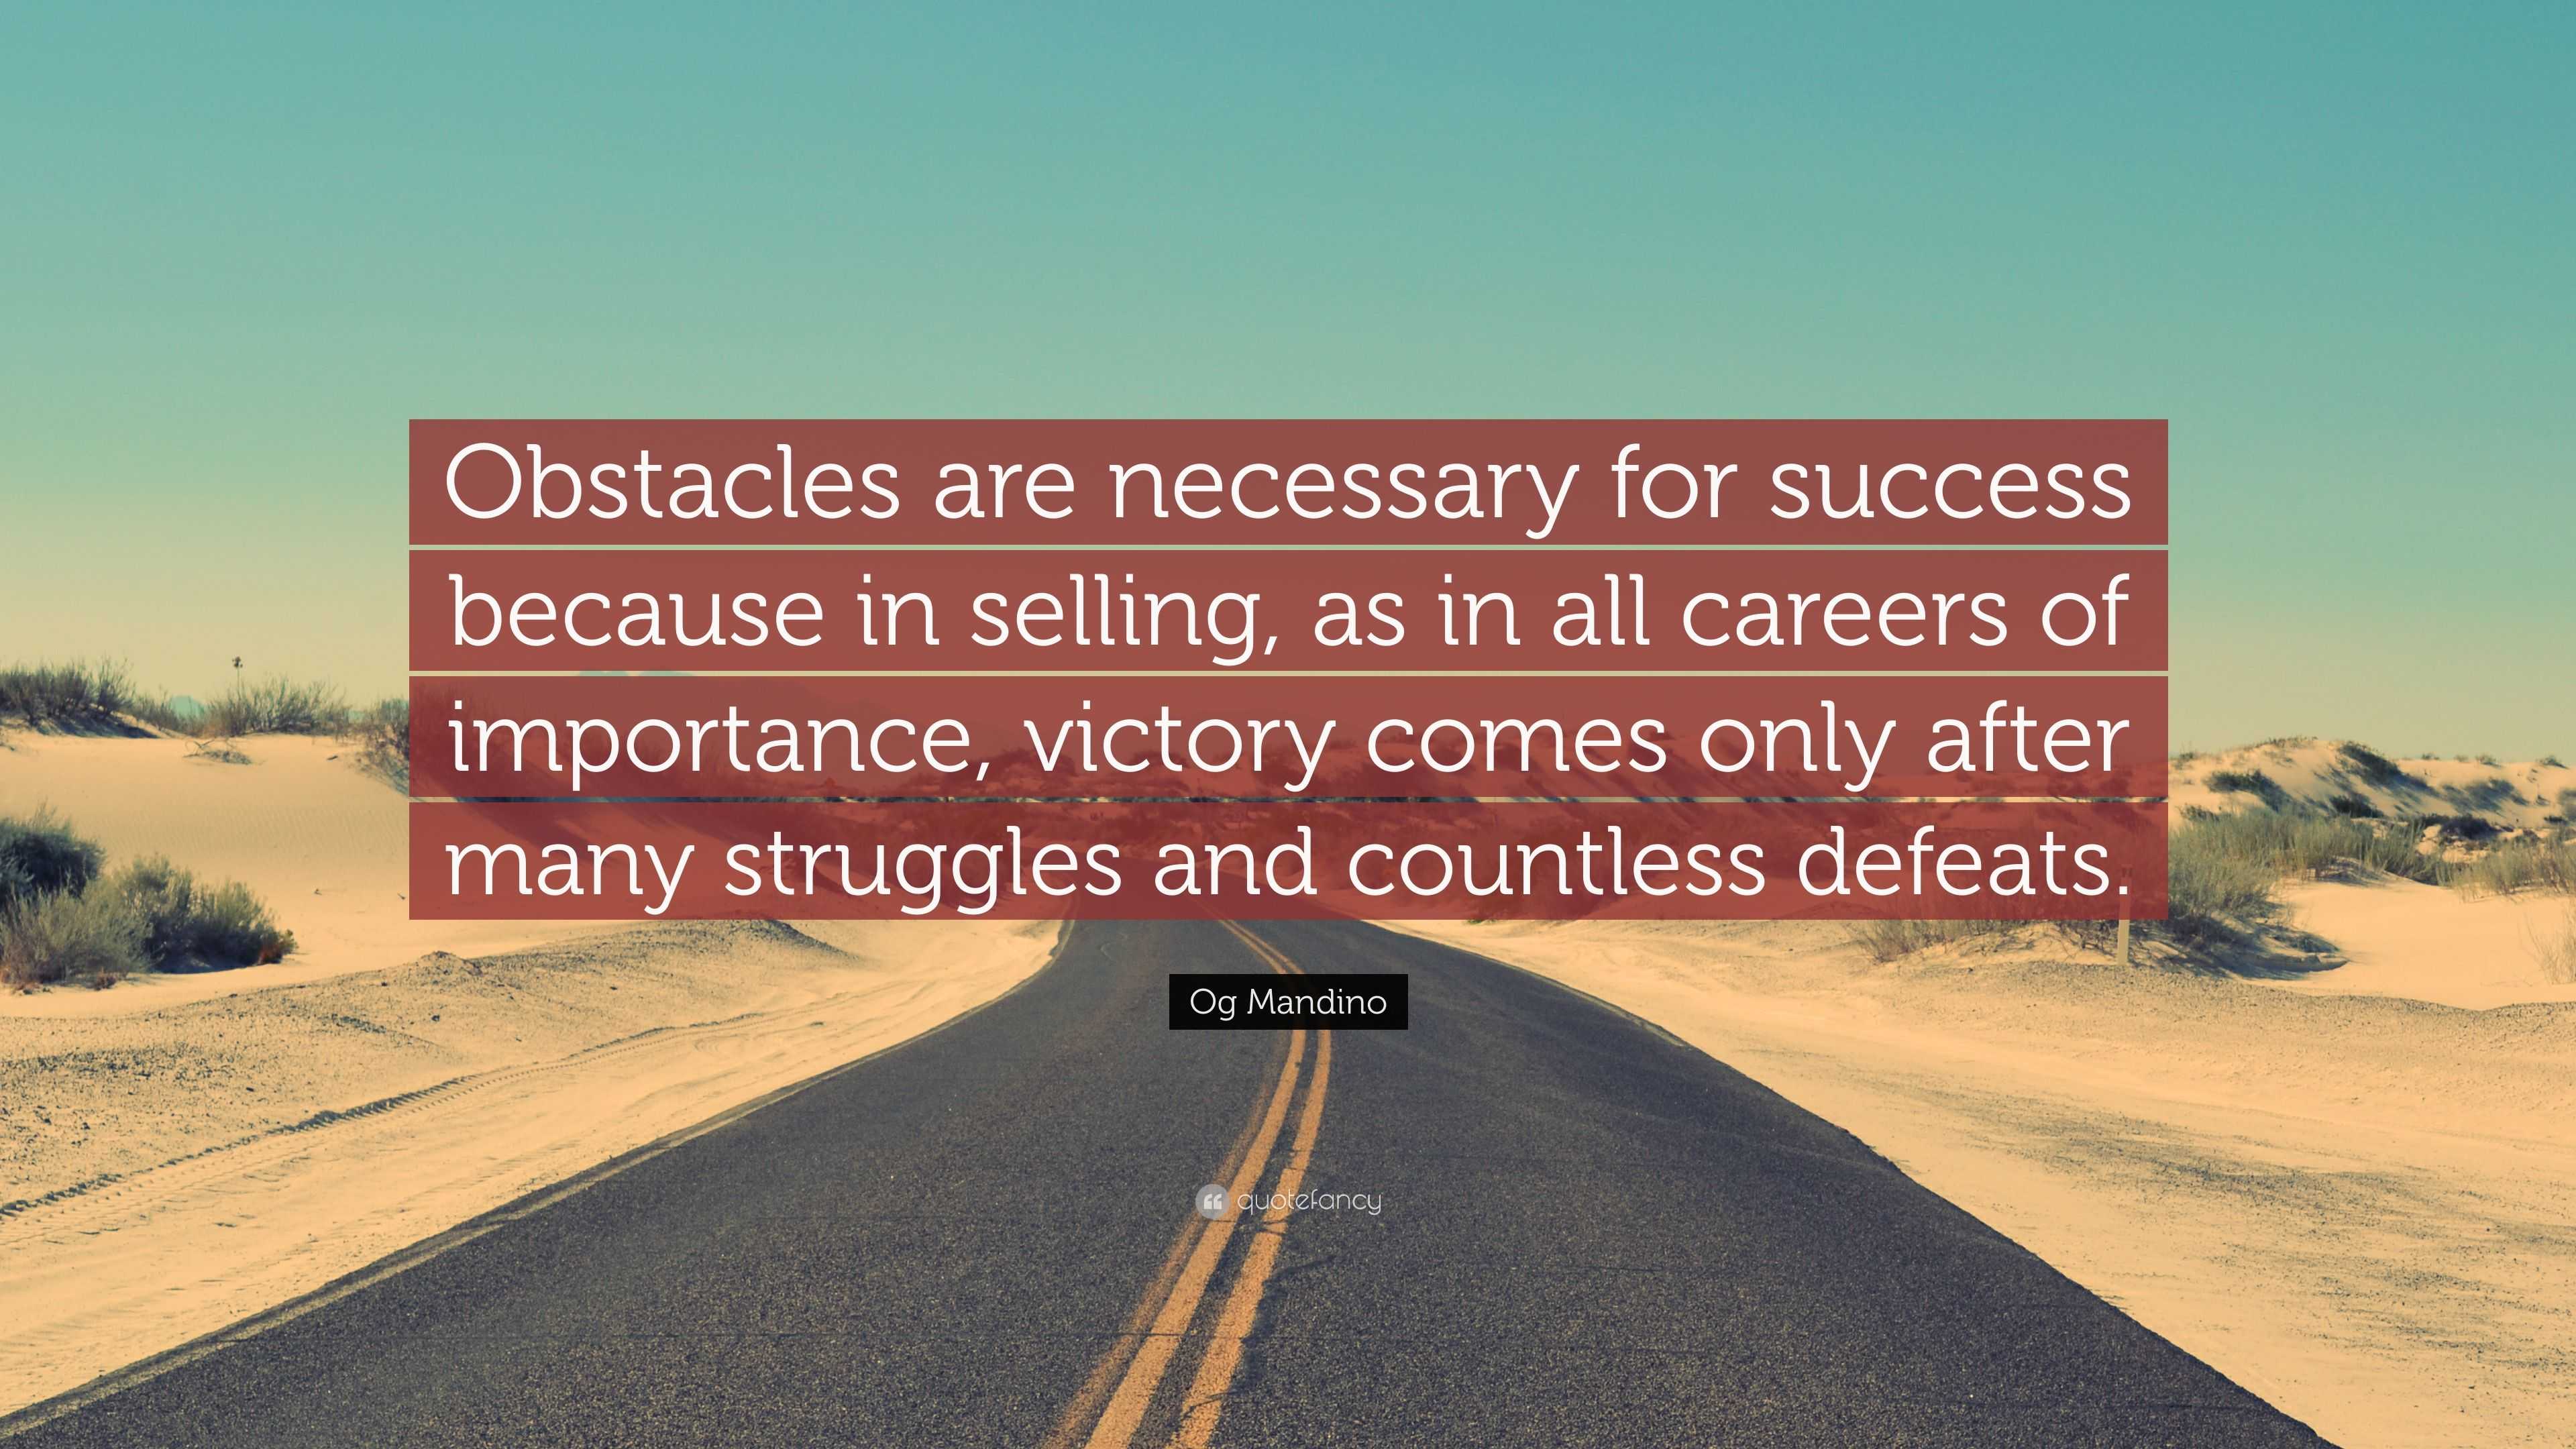 Og Mandino Quote: “Obstacles are necessary for success because in ...